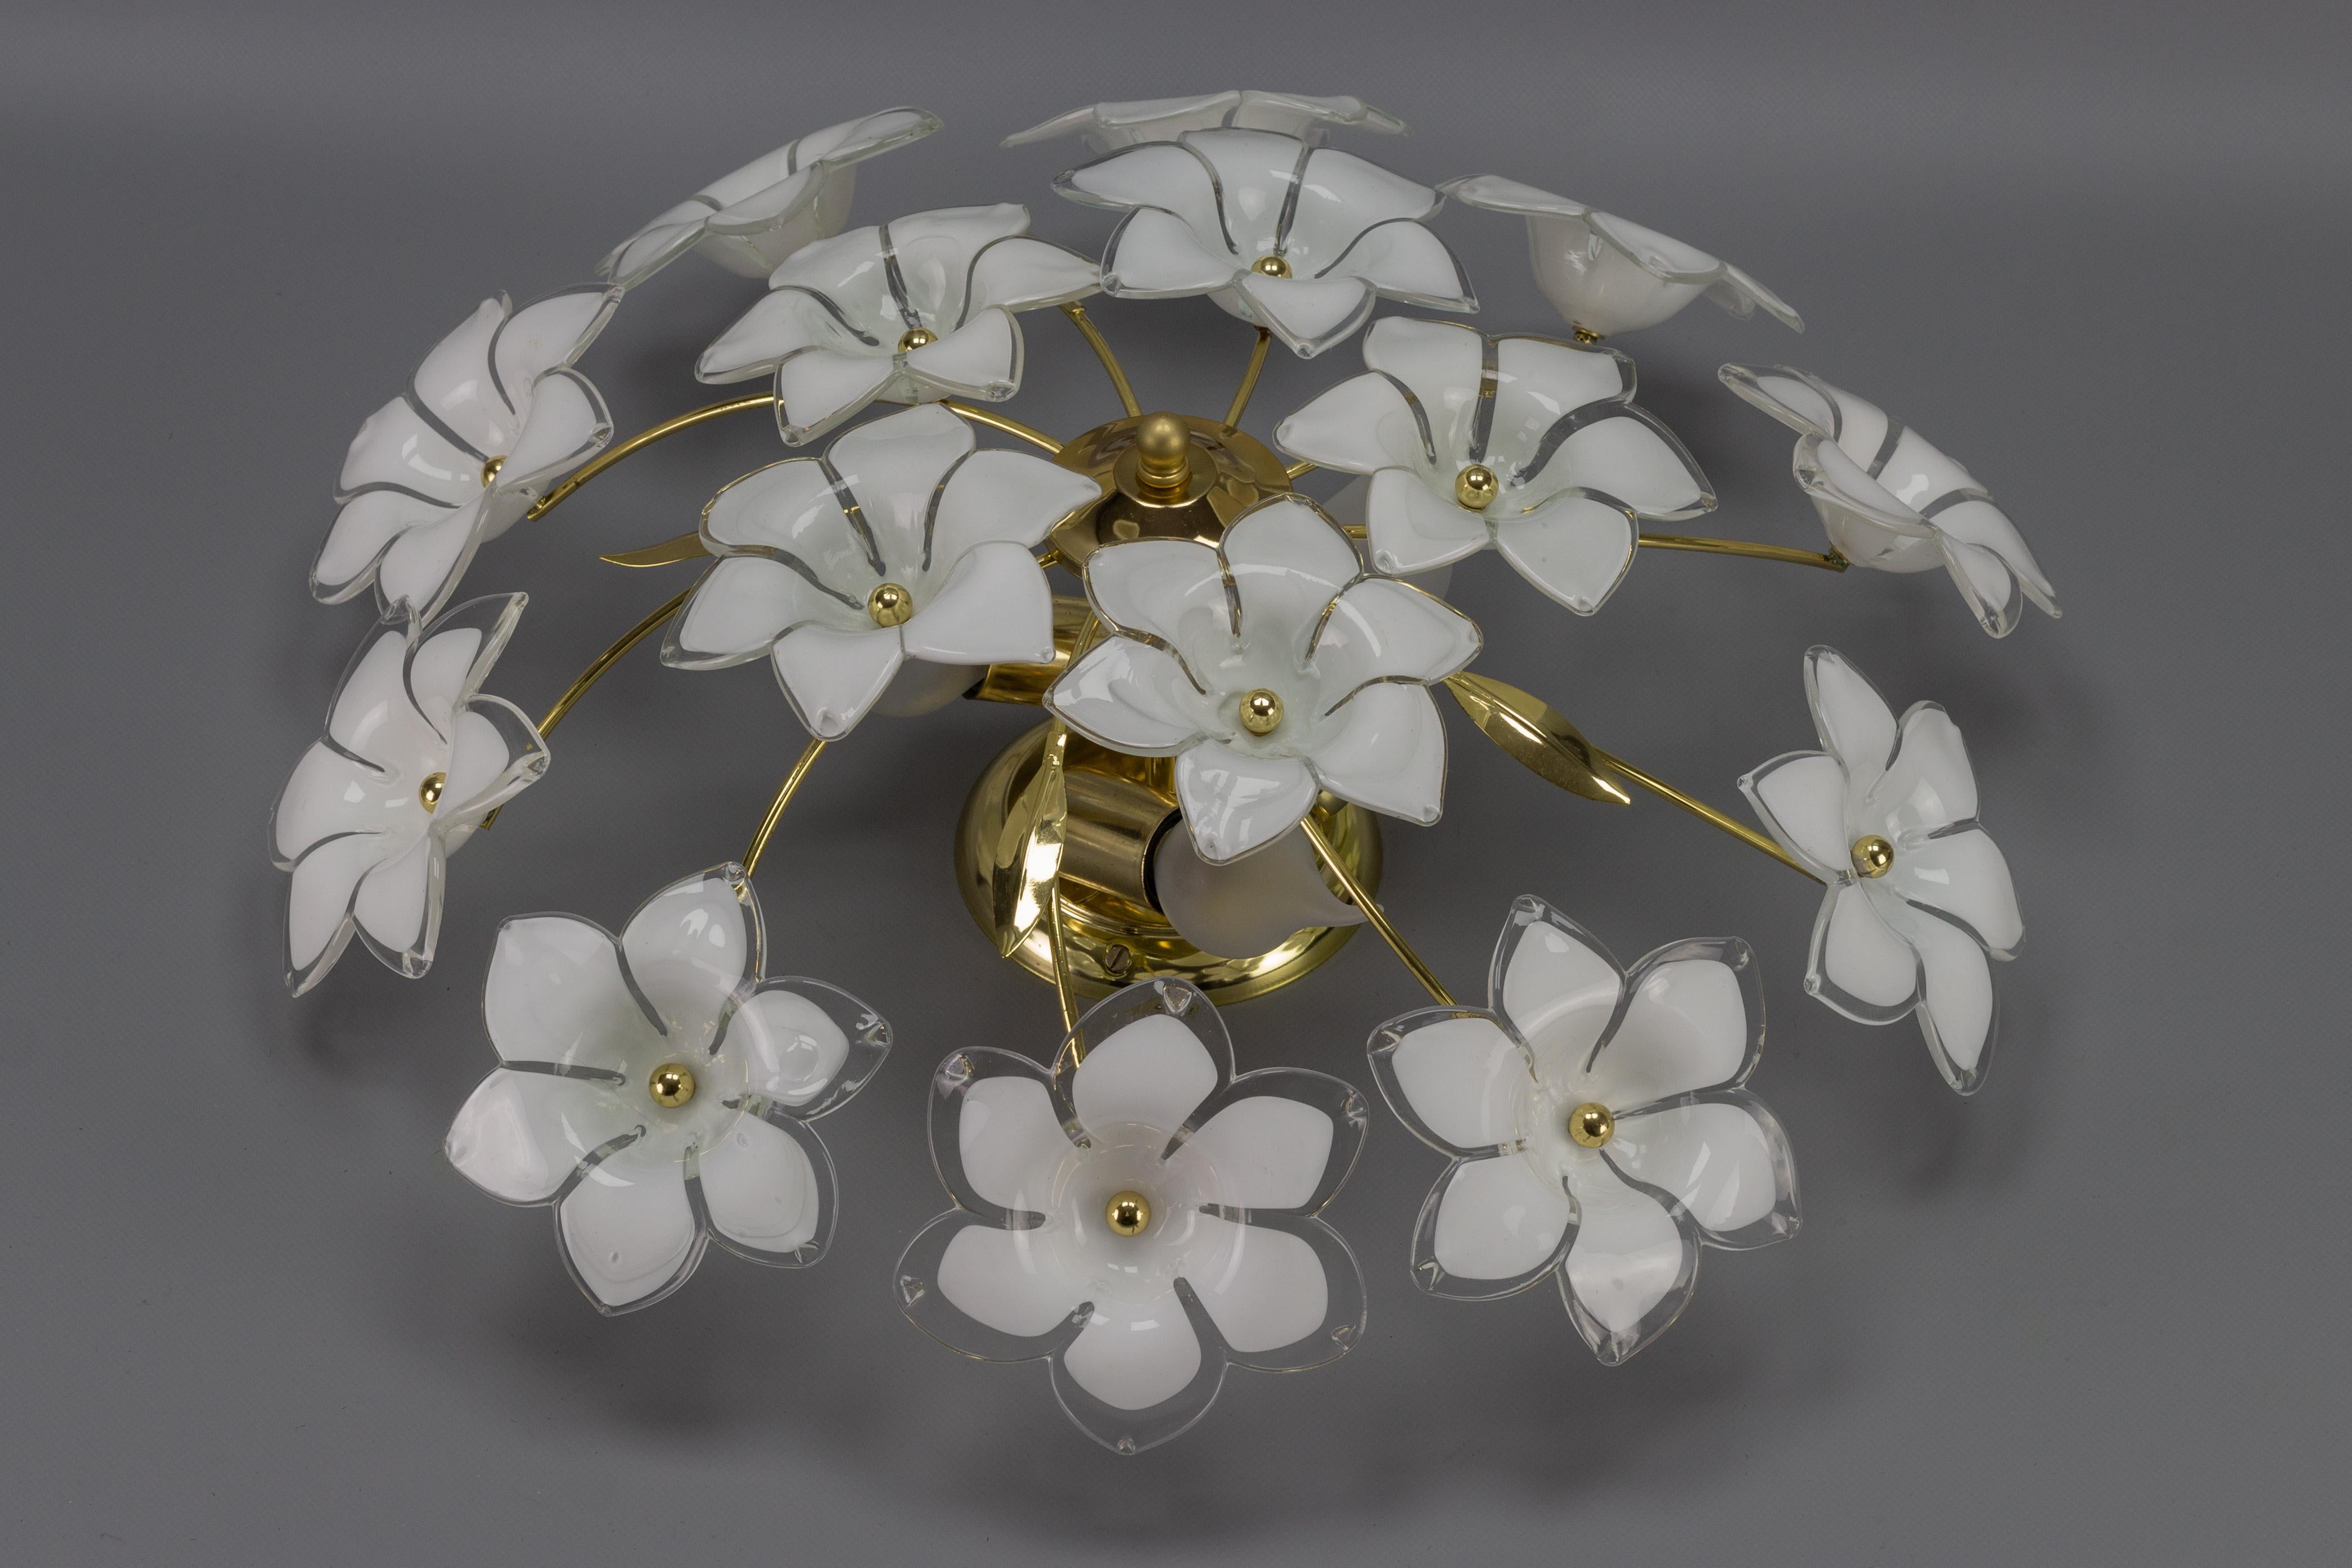 Adorable three-light ceiling light or chandelier with fifteen white and transparent glass flowers. Each beautiful Murano glass flower is hand blown and therefore all fifteen are slightly different.
Three sockets for E14 size light